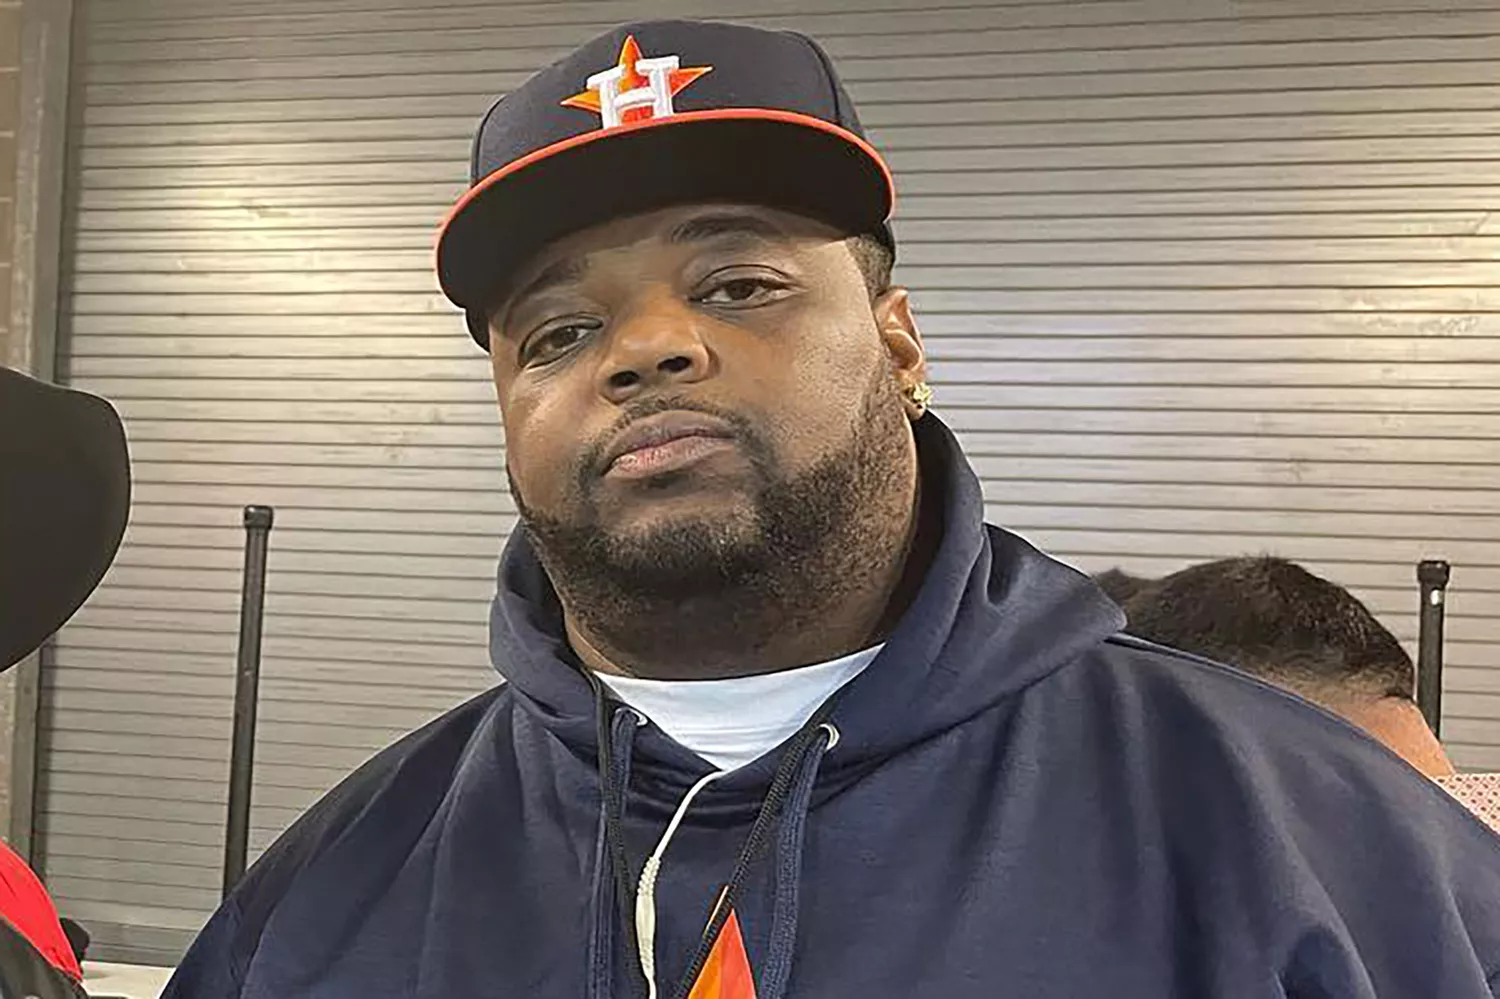 Rapper Big Pokey from Houston, a member of Screwed Up Click, died after collapsing onstage.